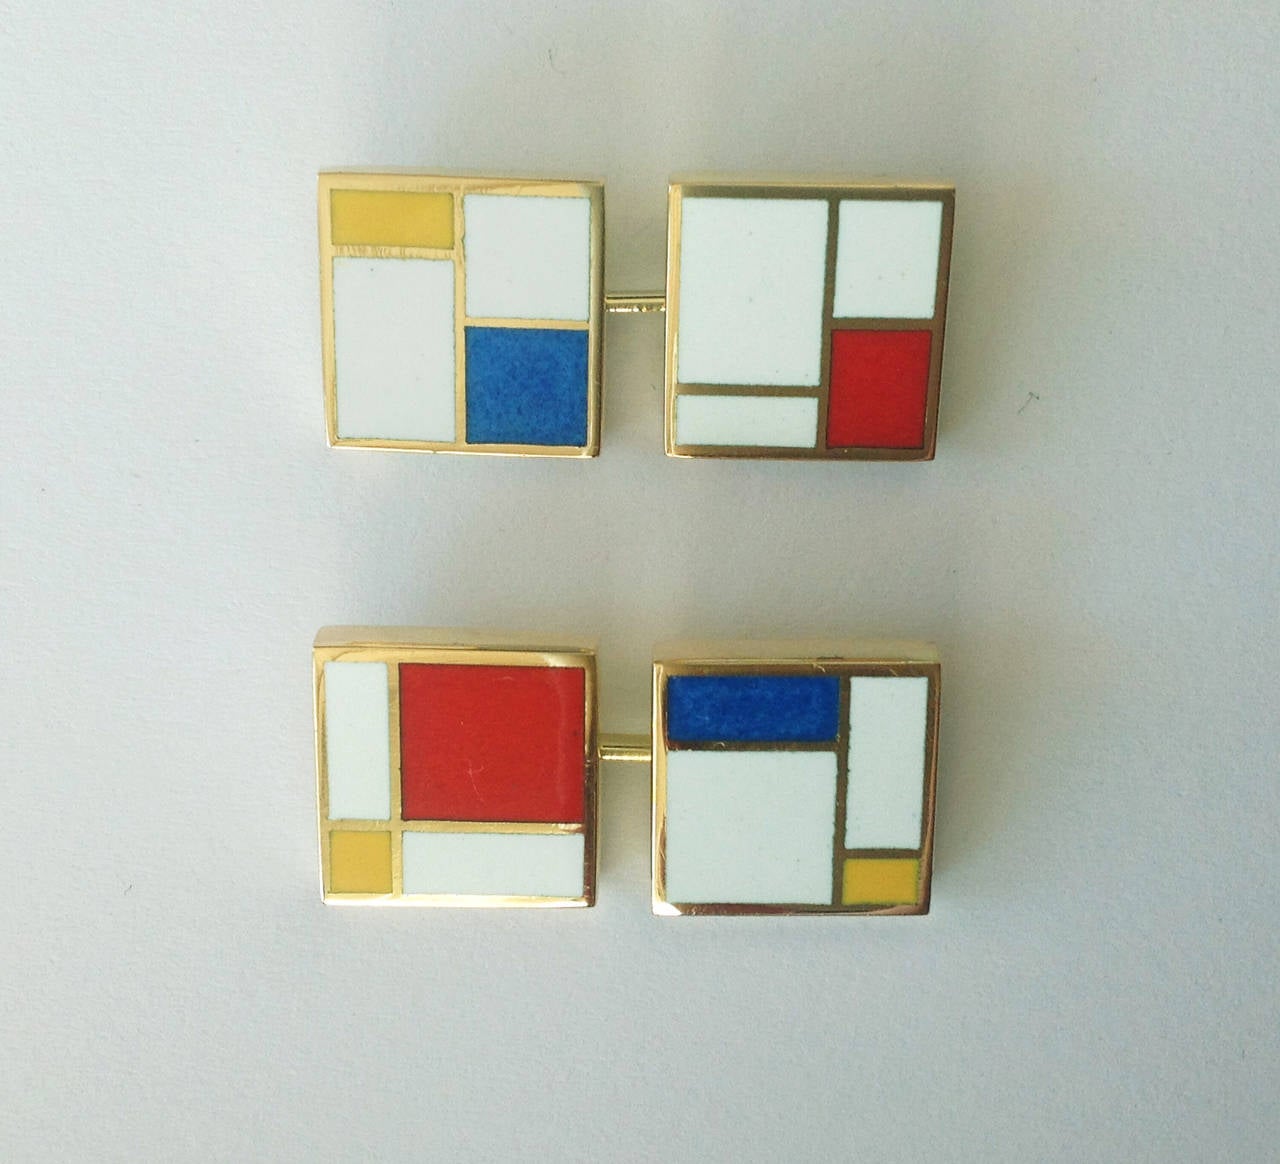 Dalben design fire Enamel and 18 k yellow gold cufflinks 0,5 x 0,5 in. inspired by Mondrian paintings.
The cufflinks are completely hand made in our atelier in Como, Italy, with rigorous quality workmanship .